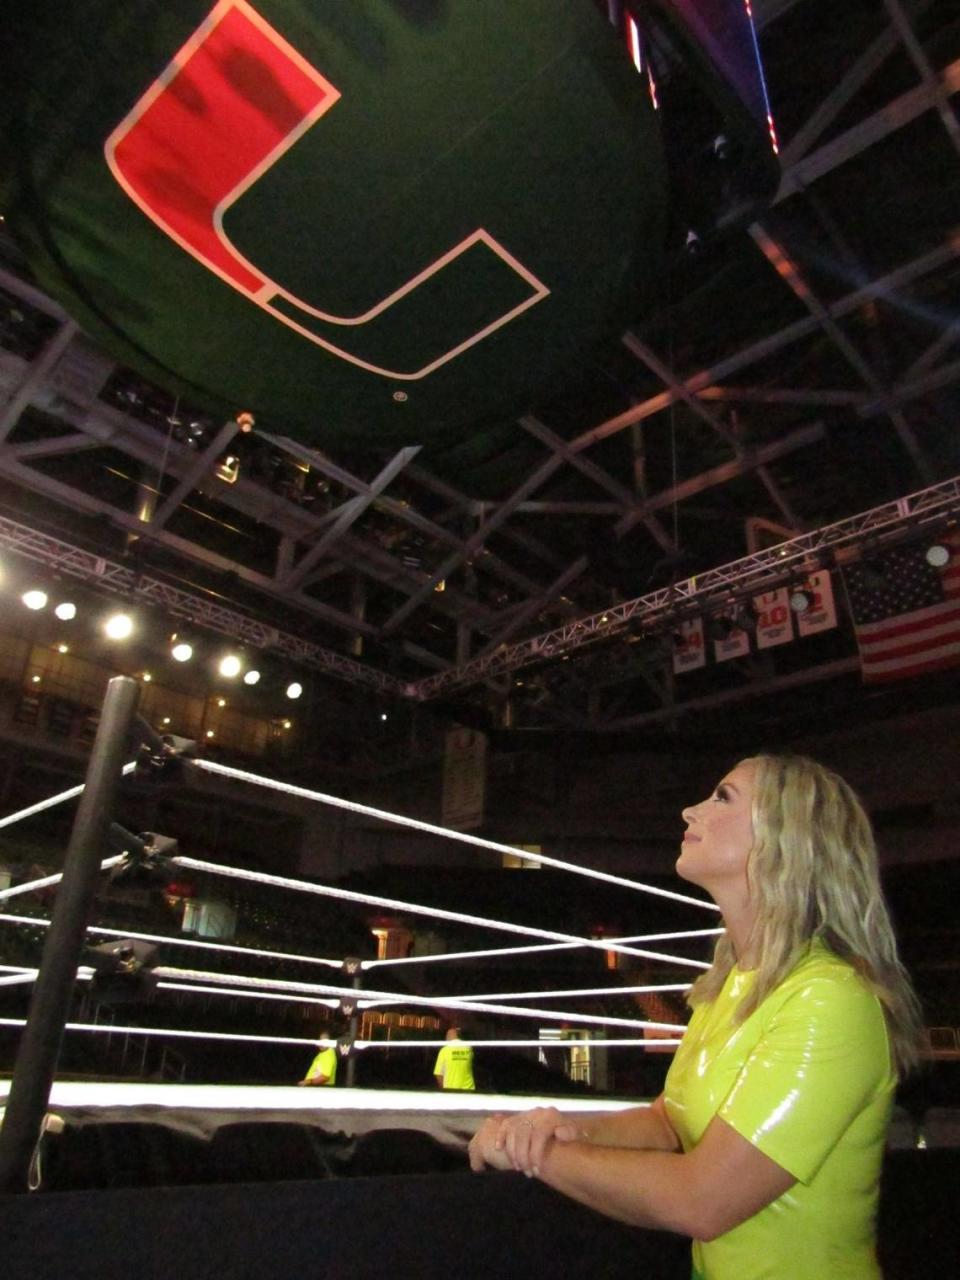 Sarah Schreiber of WWE is a proud University of Miami alum. She worked a WWE SuperShow as host and ring announcer at her alma mater in Coral Gables.